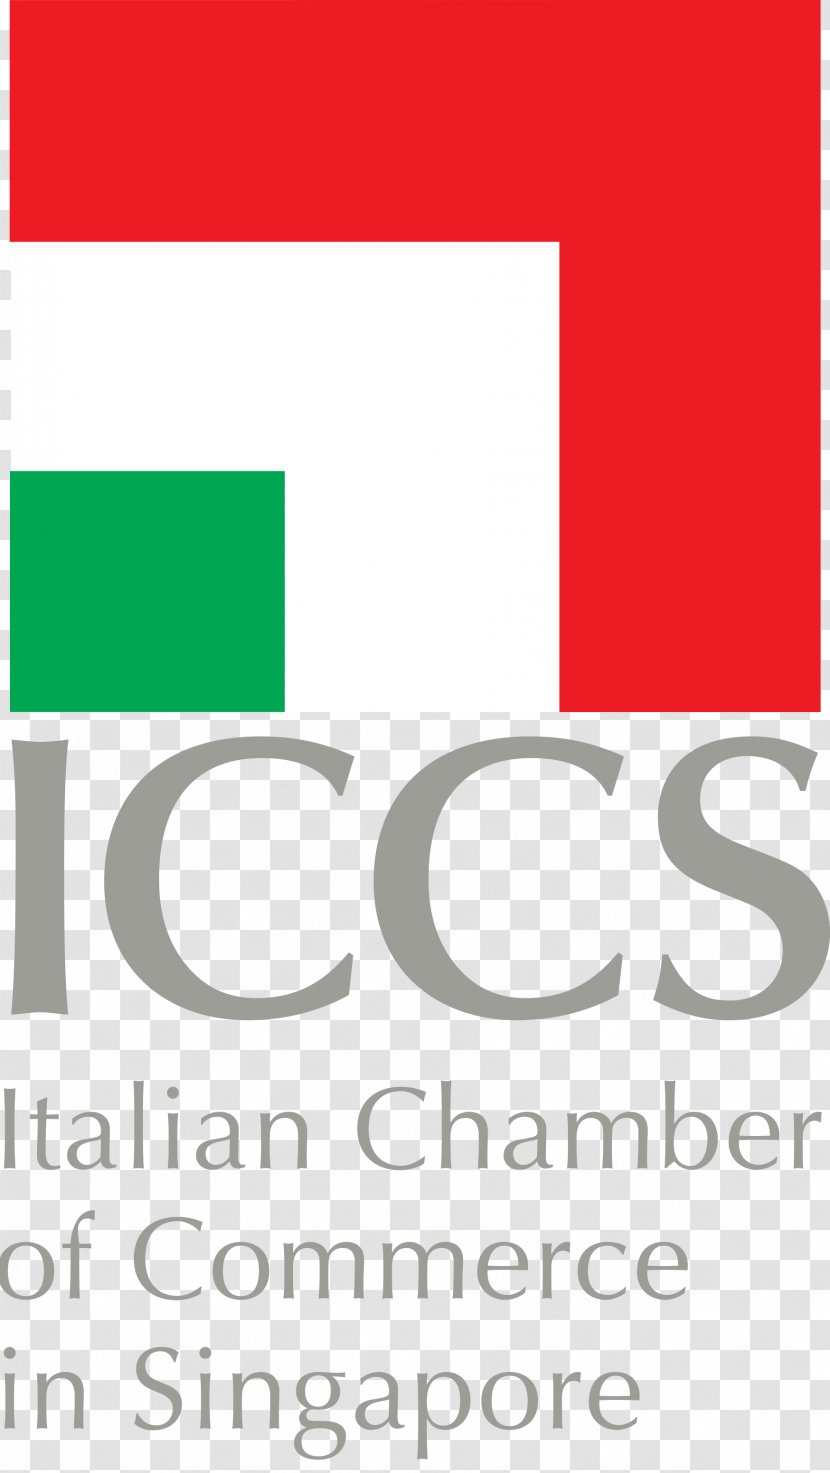 Italian Chamber Of Commerce In Singapore Family Job Translation & Interpreting - Area Transparent PNG